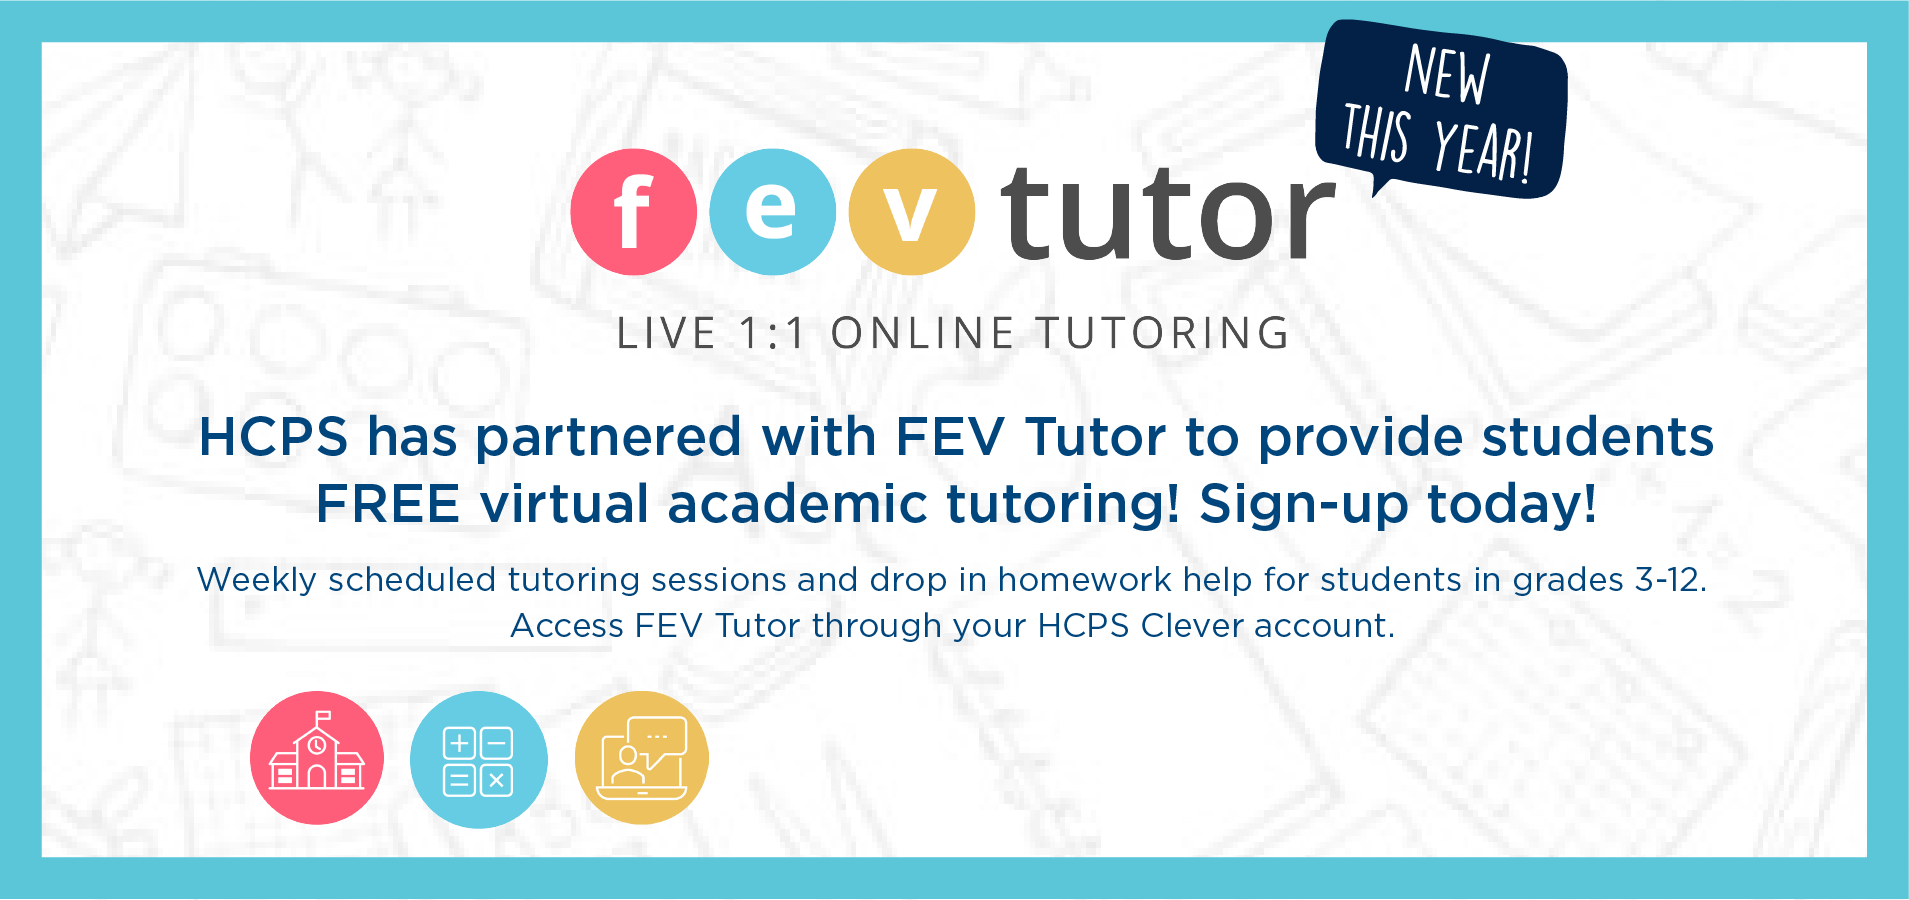 FREE Tutoring Available for Students!